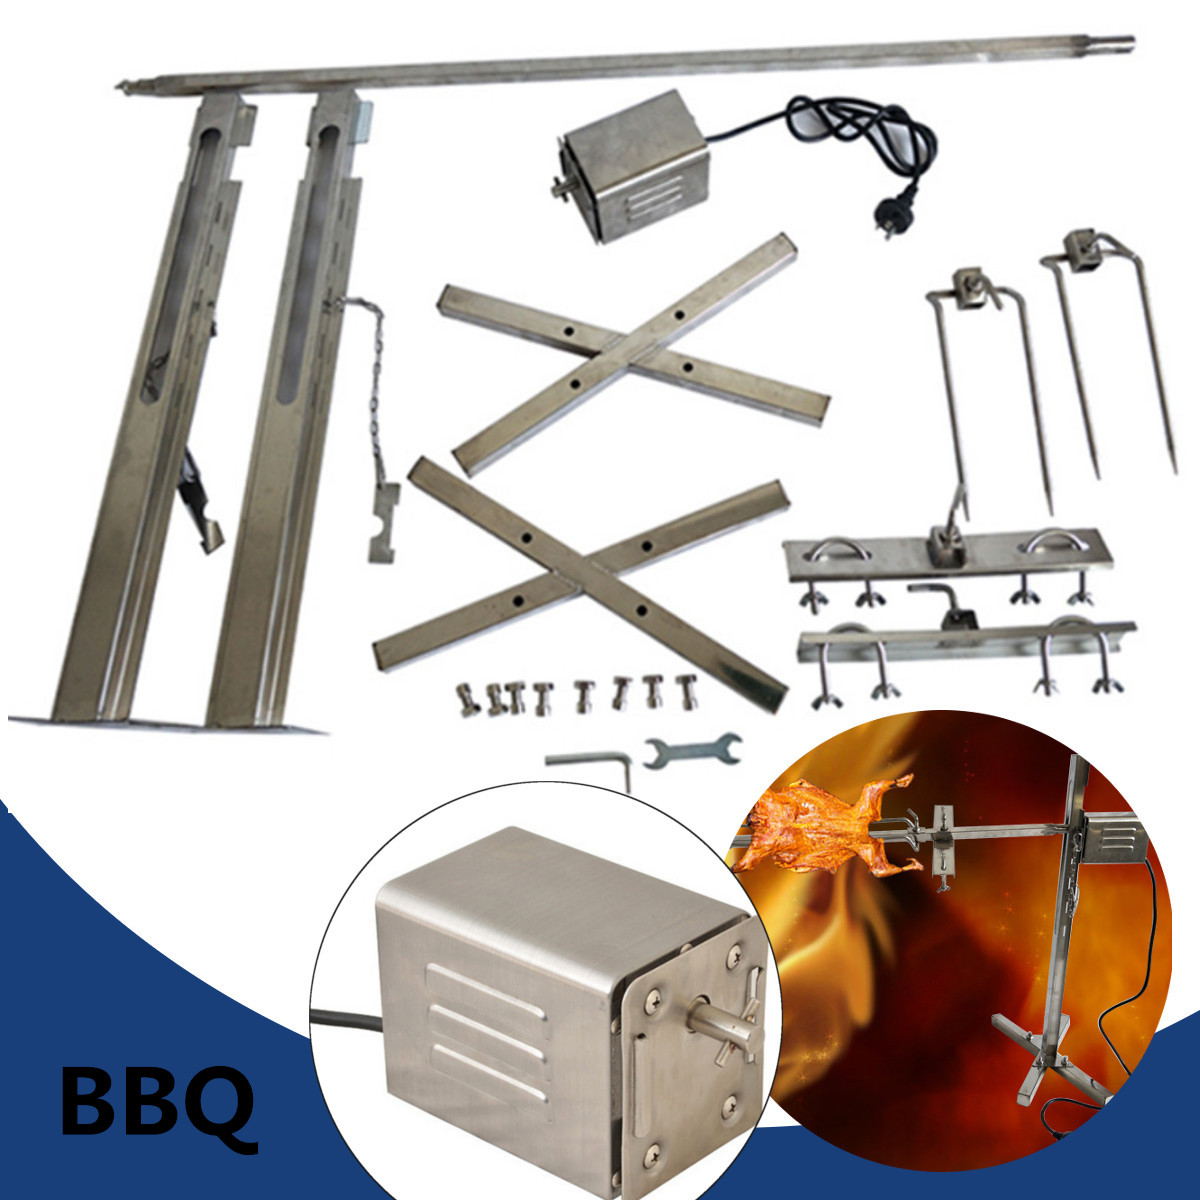 220V-15W-Stainless-Steel-Portable-Rotisserie-Grill-Spit-Tripod-BBQ-Lamb-Camping-Roaster-BBQ-Grill-1411901-3